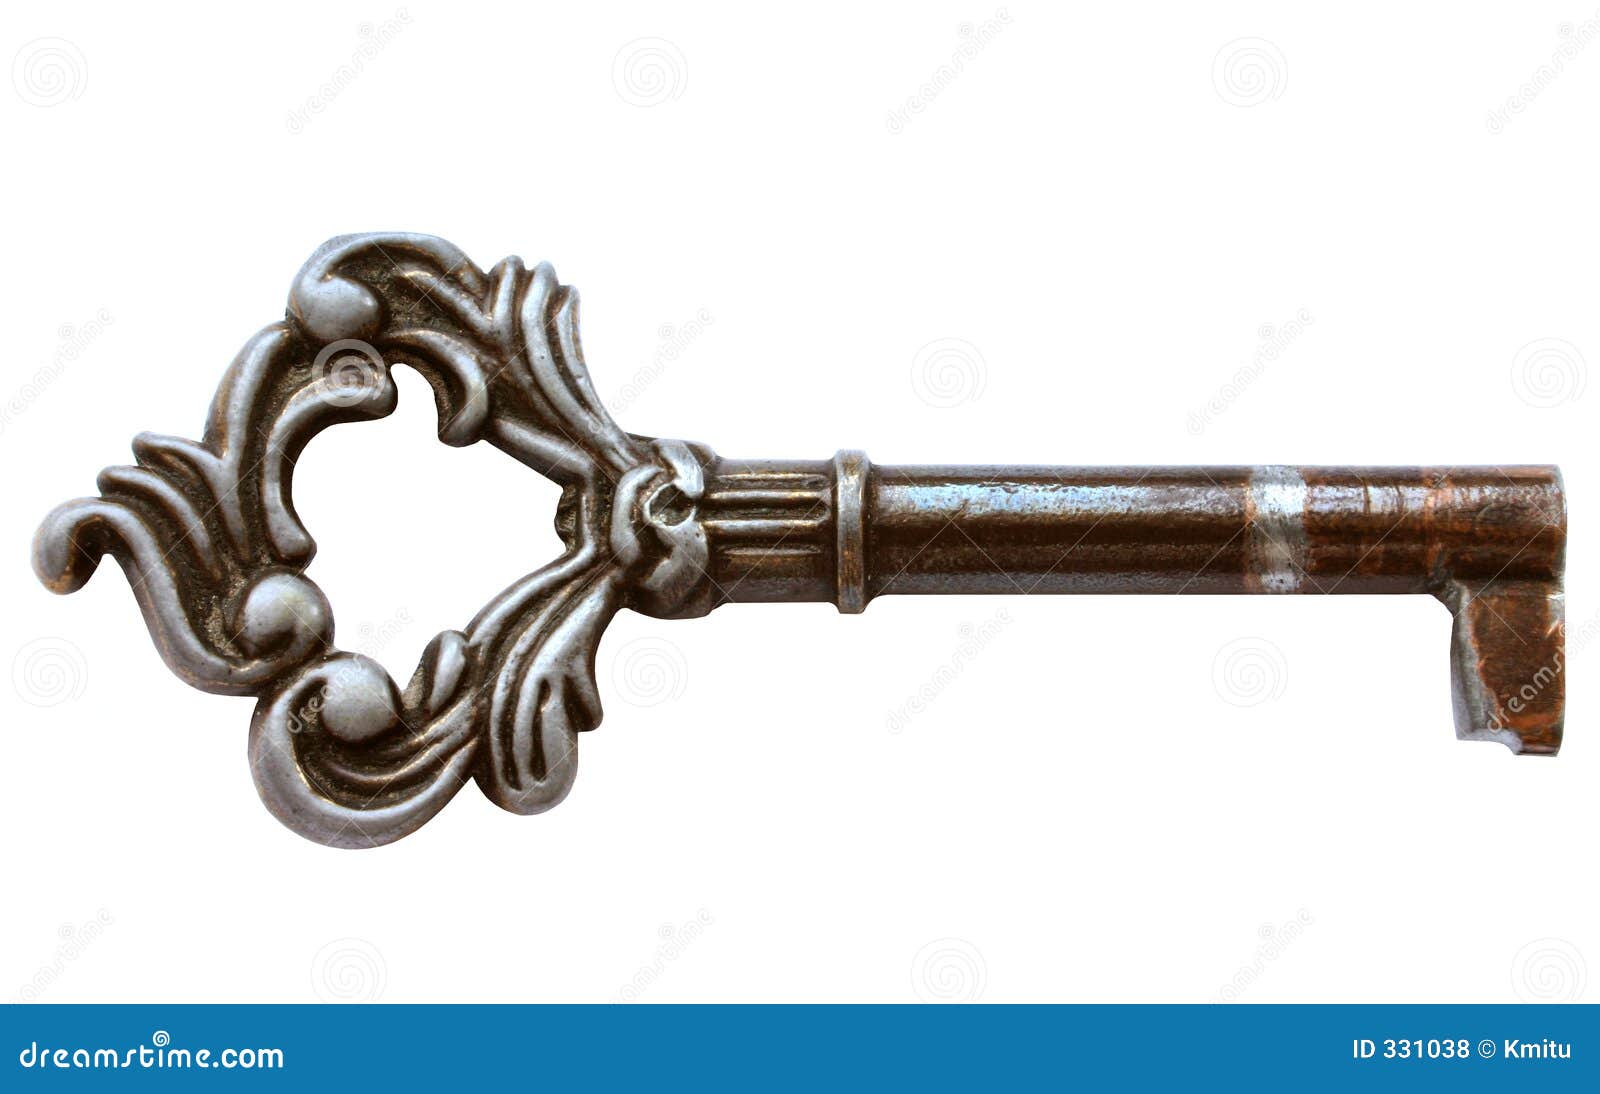 Vintage Lock And Key: Over 38,435 Royalty-Free Licensable Stock  Illustrations & Drawings